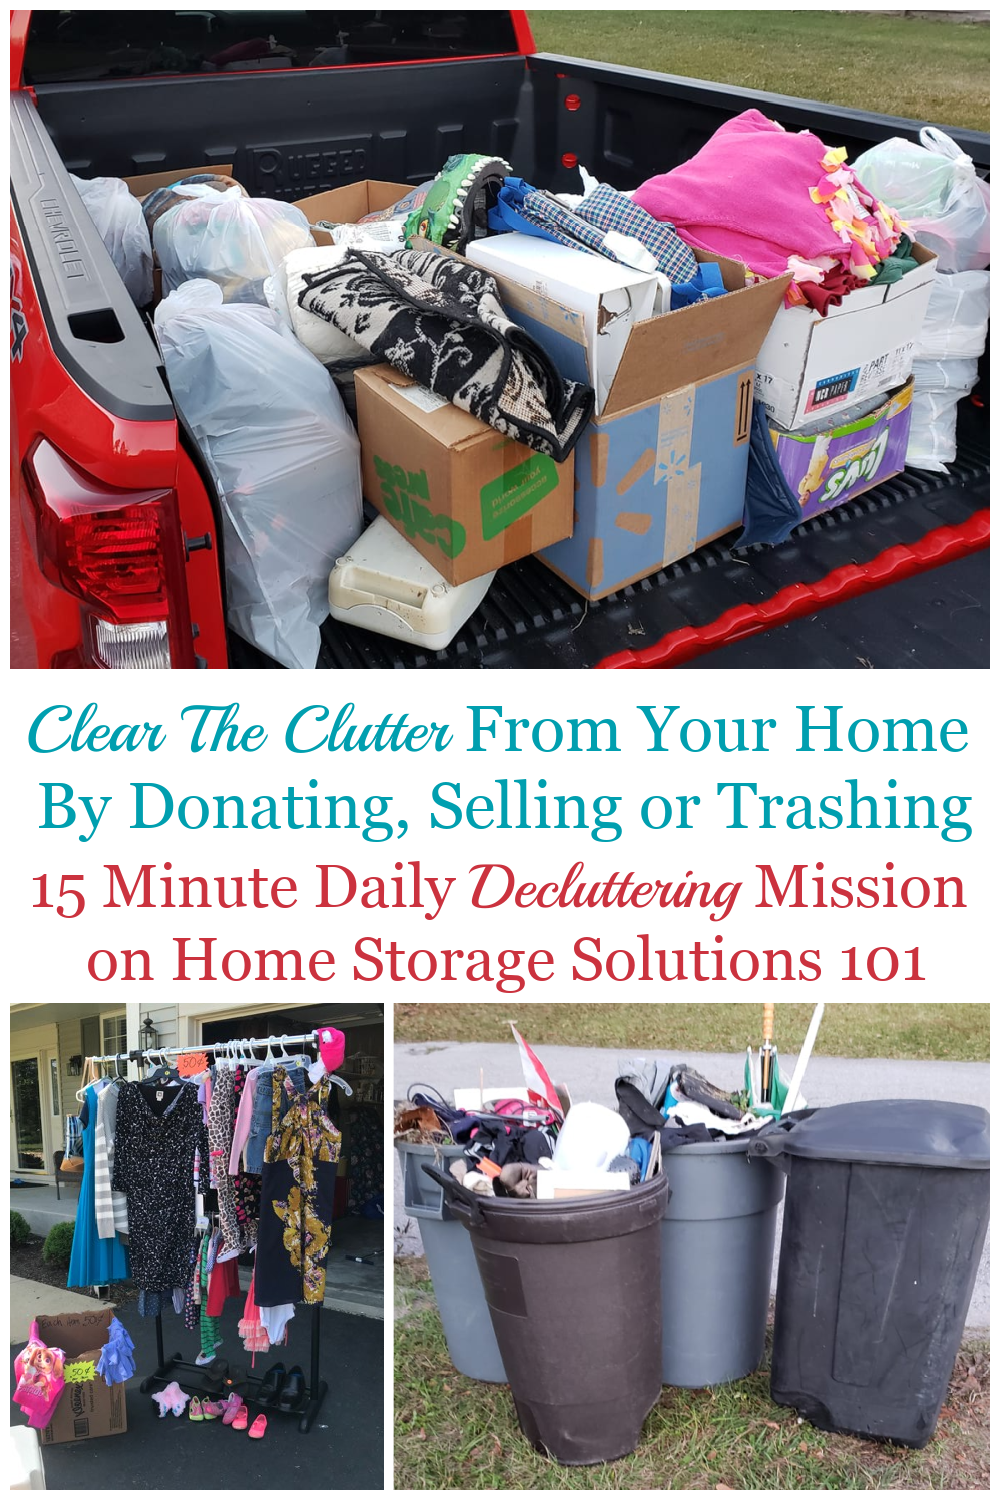 In this recurring Declutter 365 mission you should clear the clutter from your home that you've identified in previous missions, to complete the decluttering process {on Home Storage Solutions 101} #ClearTheClutter #Declutter365